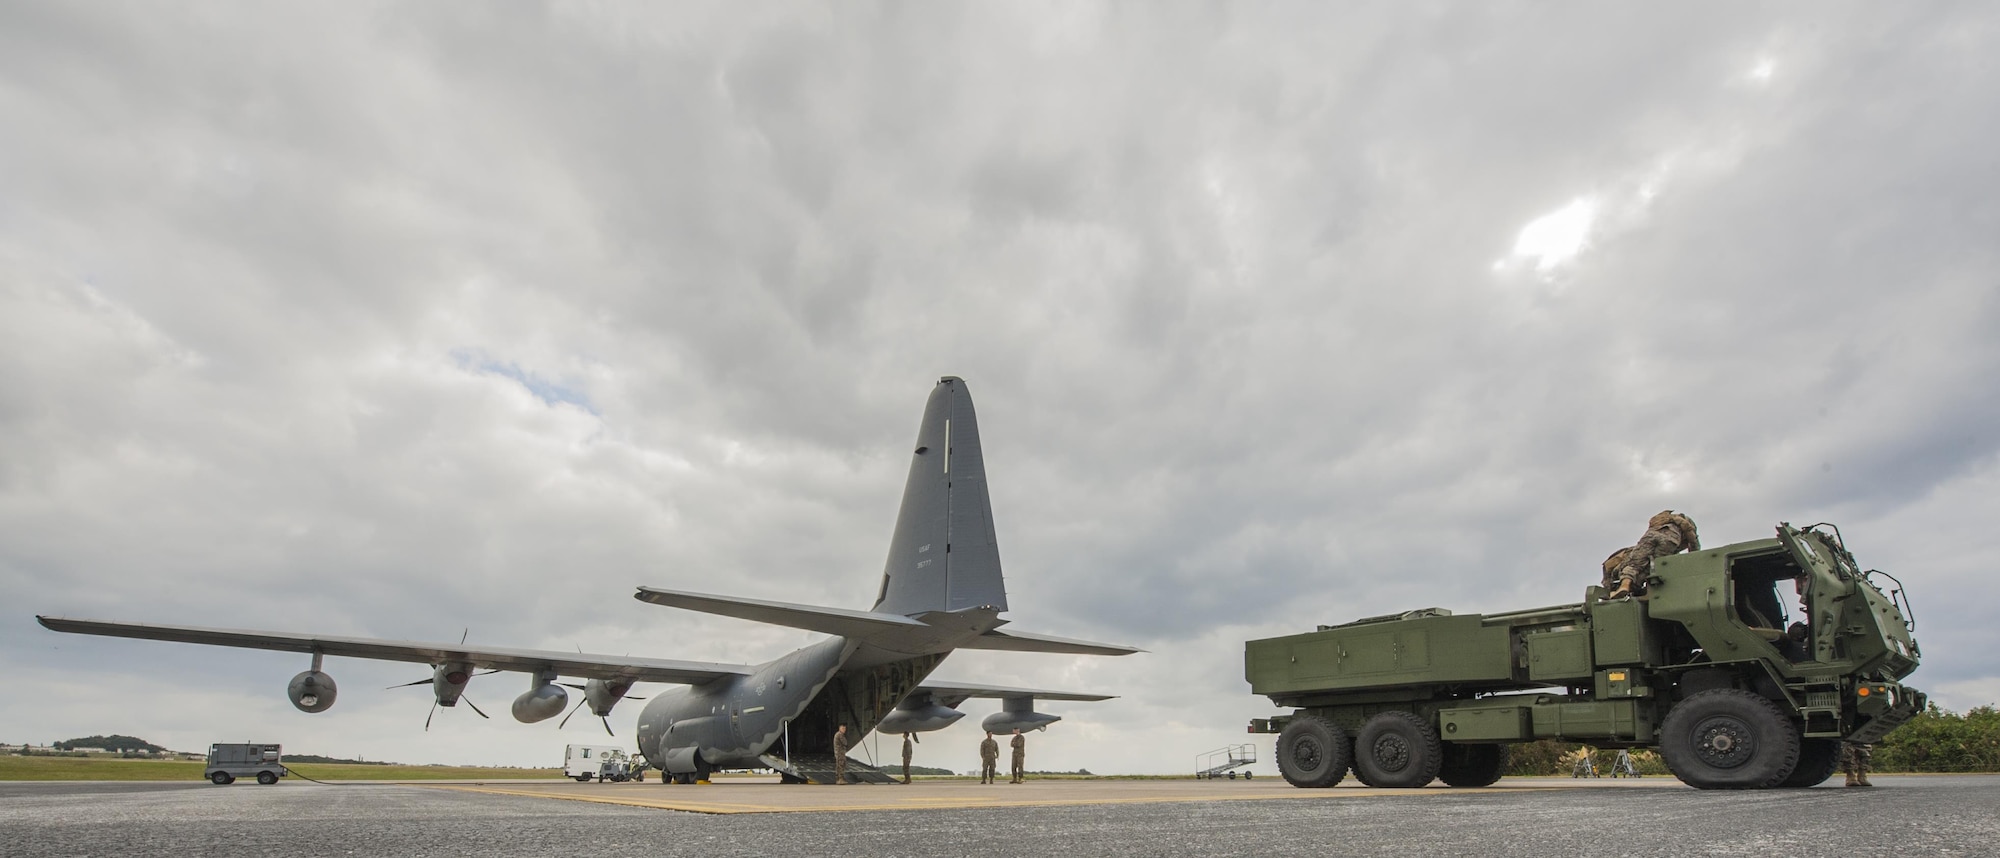 U.S. Marine Corps Marines with the 5th Battalion, 11th Marines, and U.S. Air Force Airmen with the 17th Special Operations Squadron, load a high mobility artillery rocket system onto a C-130 Hercules on the flightline at Kadena Air Base, Japan, Jan. 23, 2017. A HIMAR is a self-propelled artillery piece mounted on a 5-ton chassis with a rocket pod on the back that shoots rockets and missiles. (U.S. Air Force photo by Airman 1st Class Nick Emerick/Released)